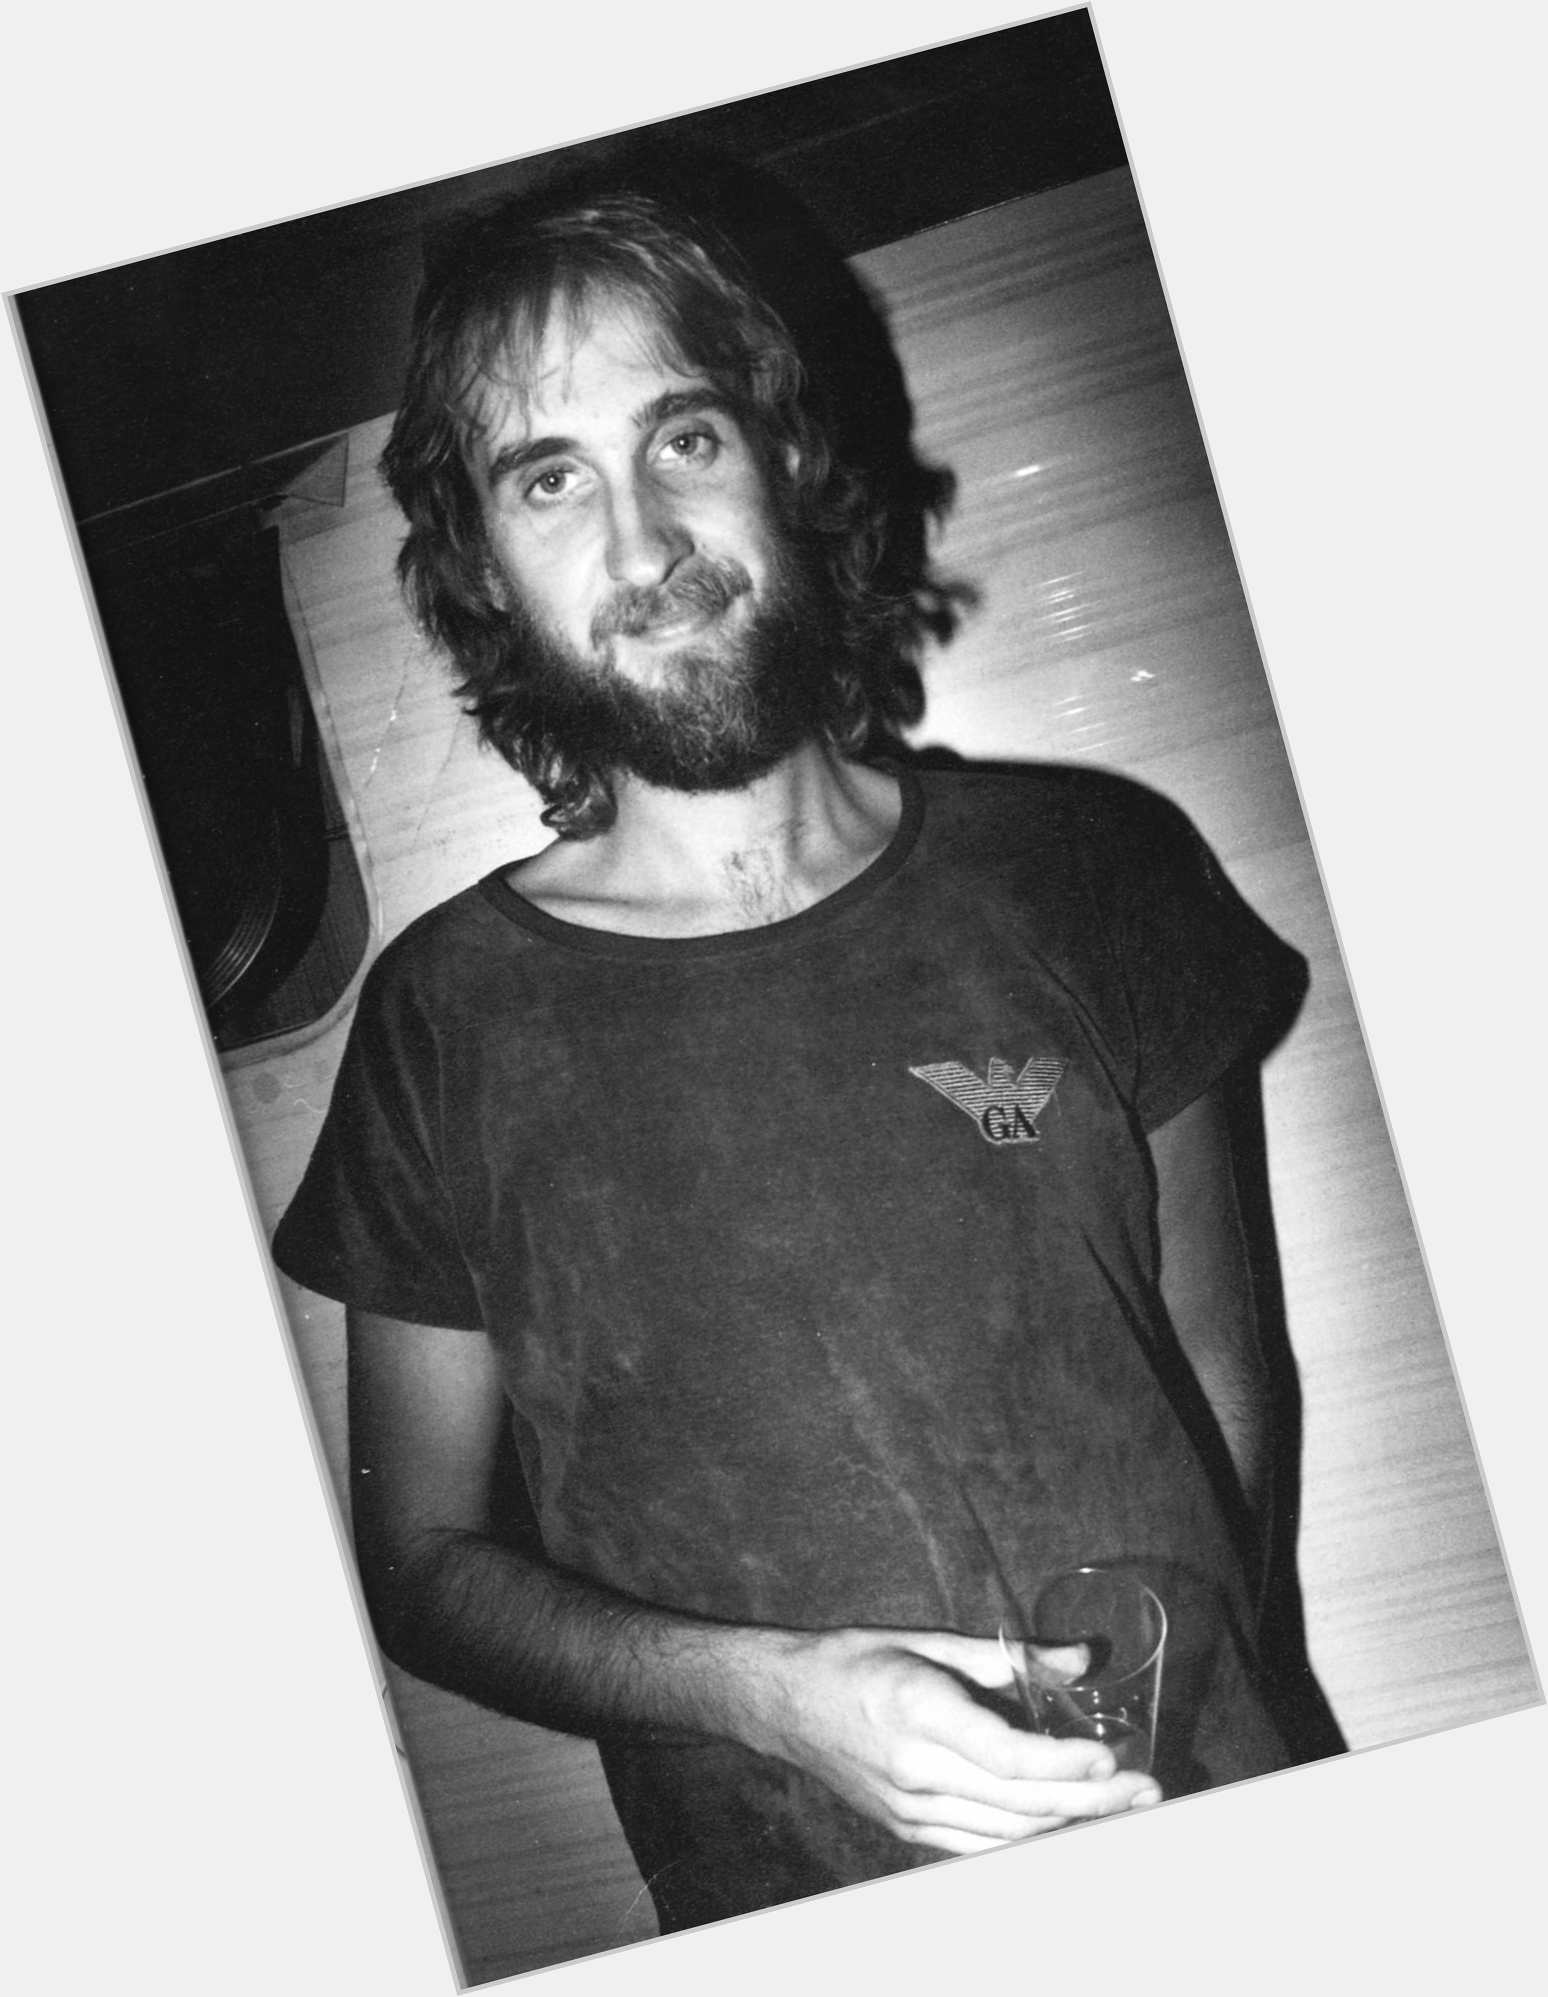 Https://fanpagepress.net/m/M/Mike Rutherford Where Who 3